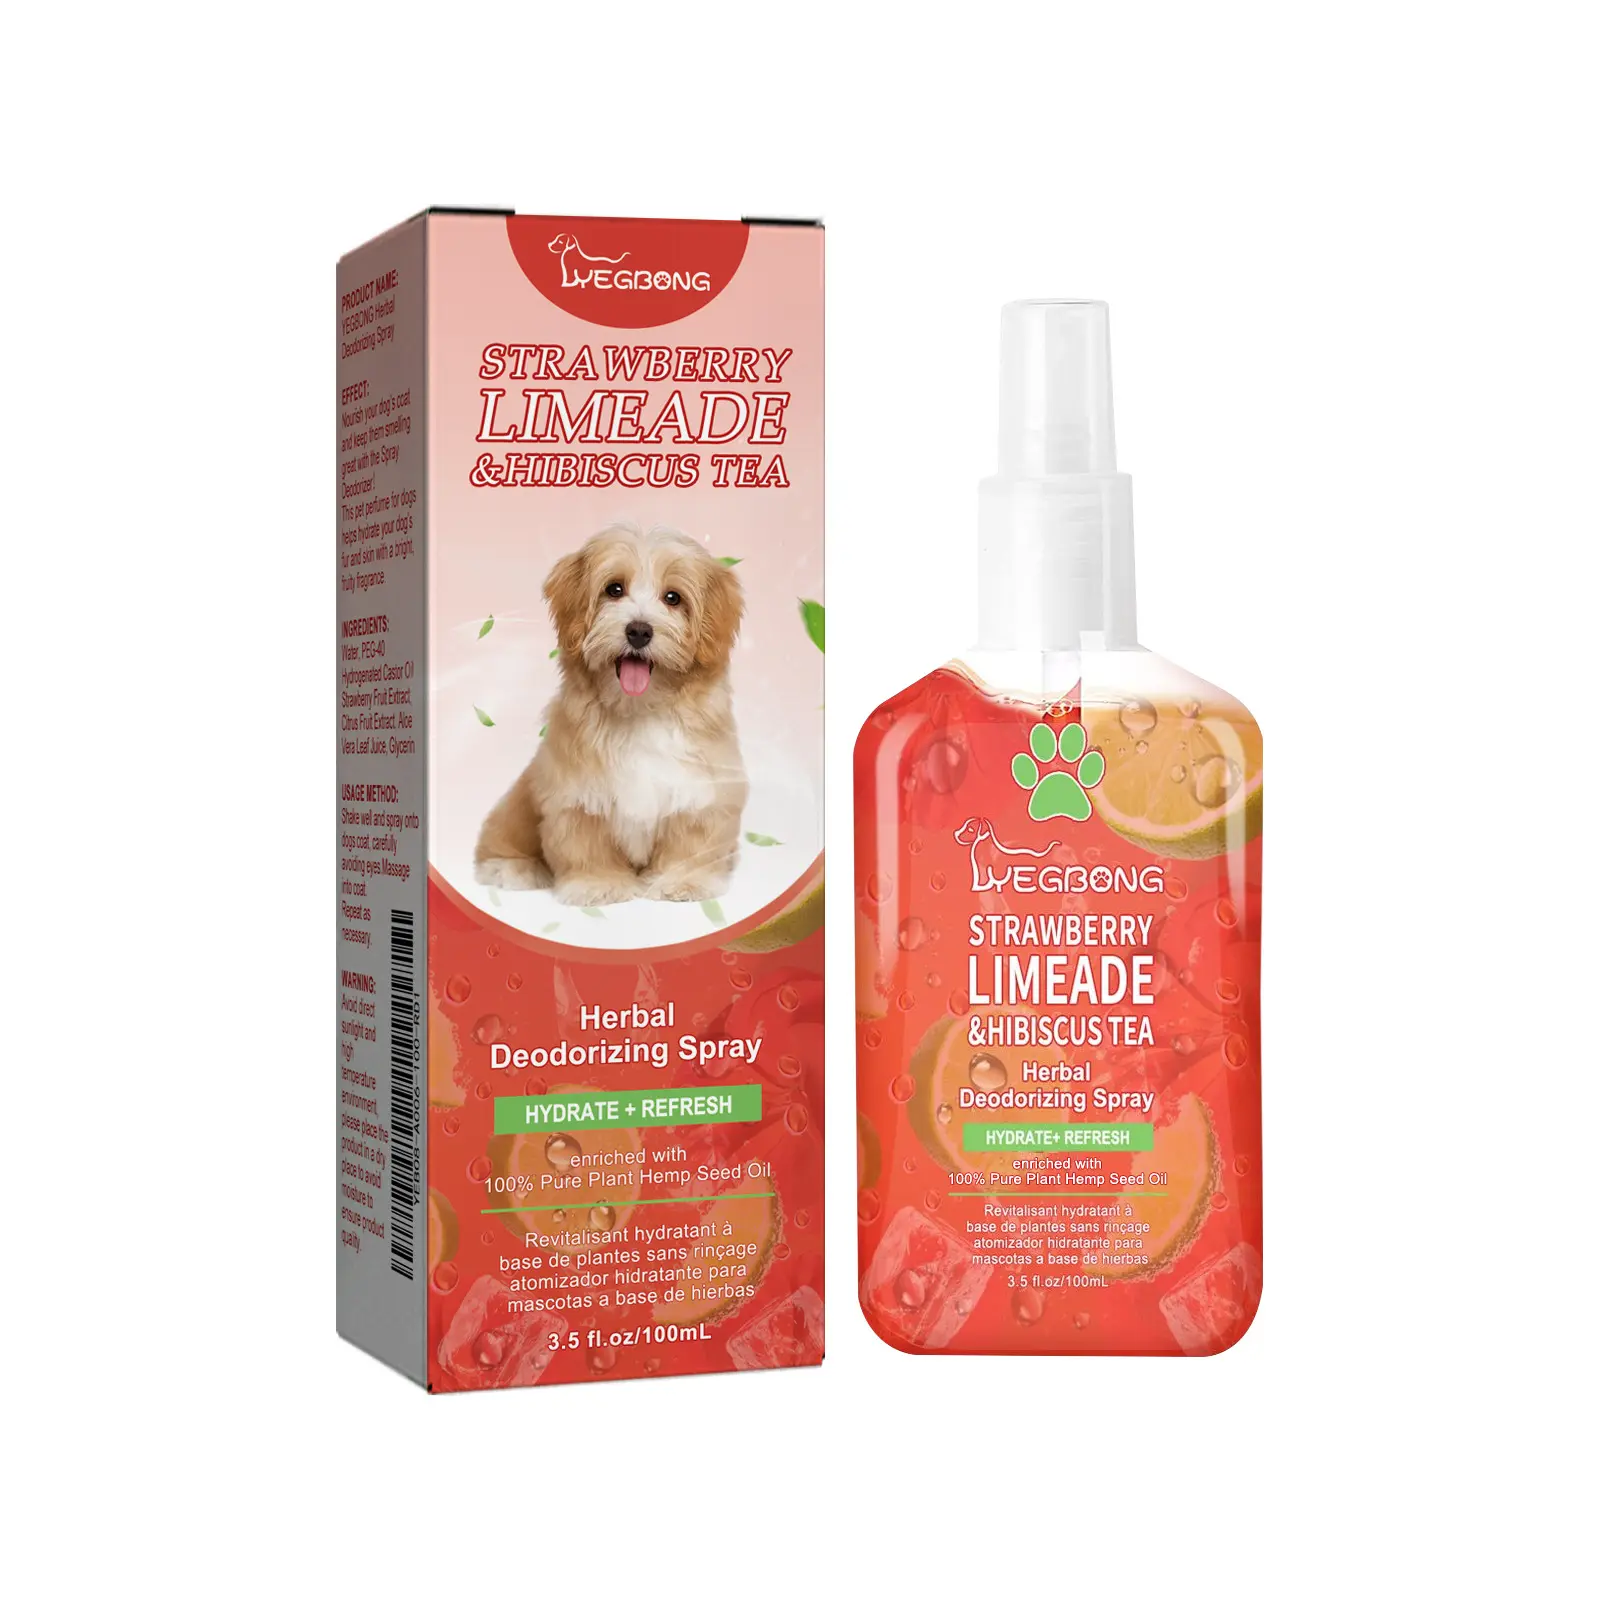 YEGBONG Pet Odor Removal Deodorant Spray Indoor Deodorizer for cats dogs Deodorizer for Staying fragrant refreshing urinating